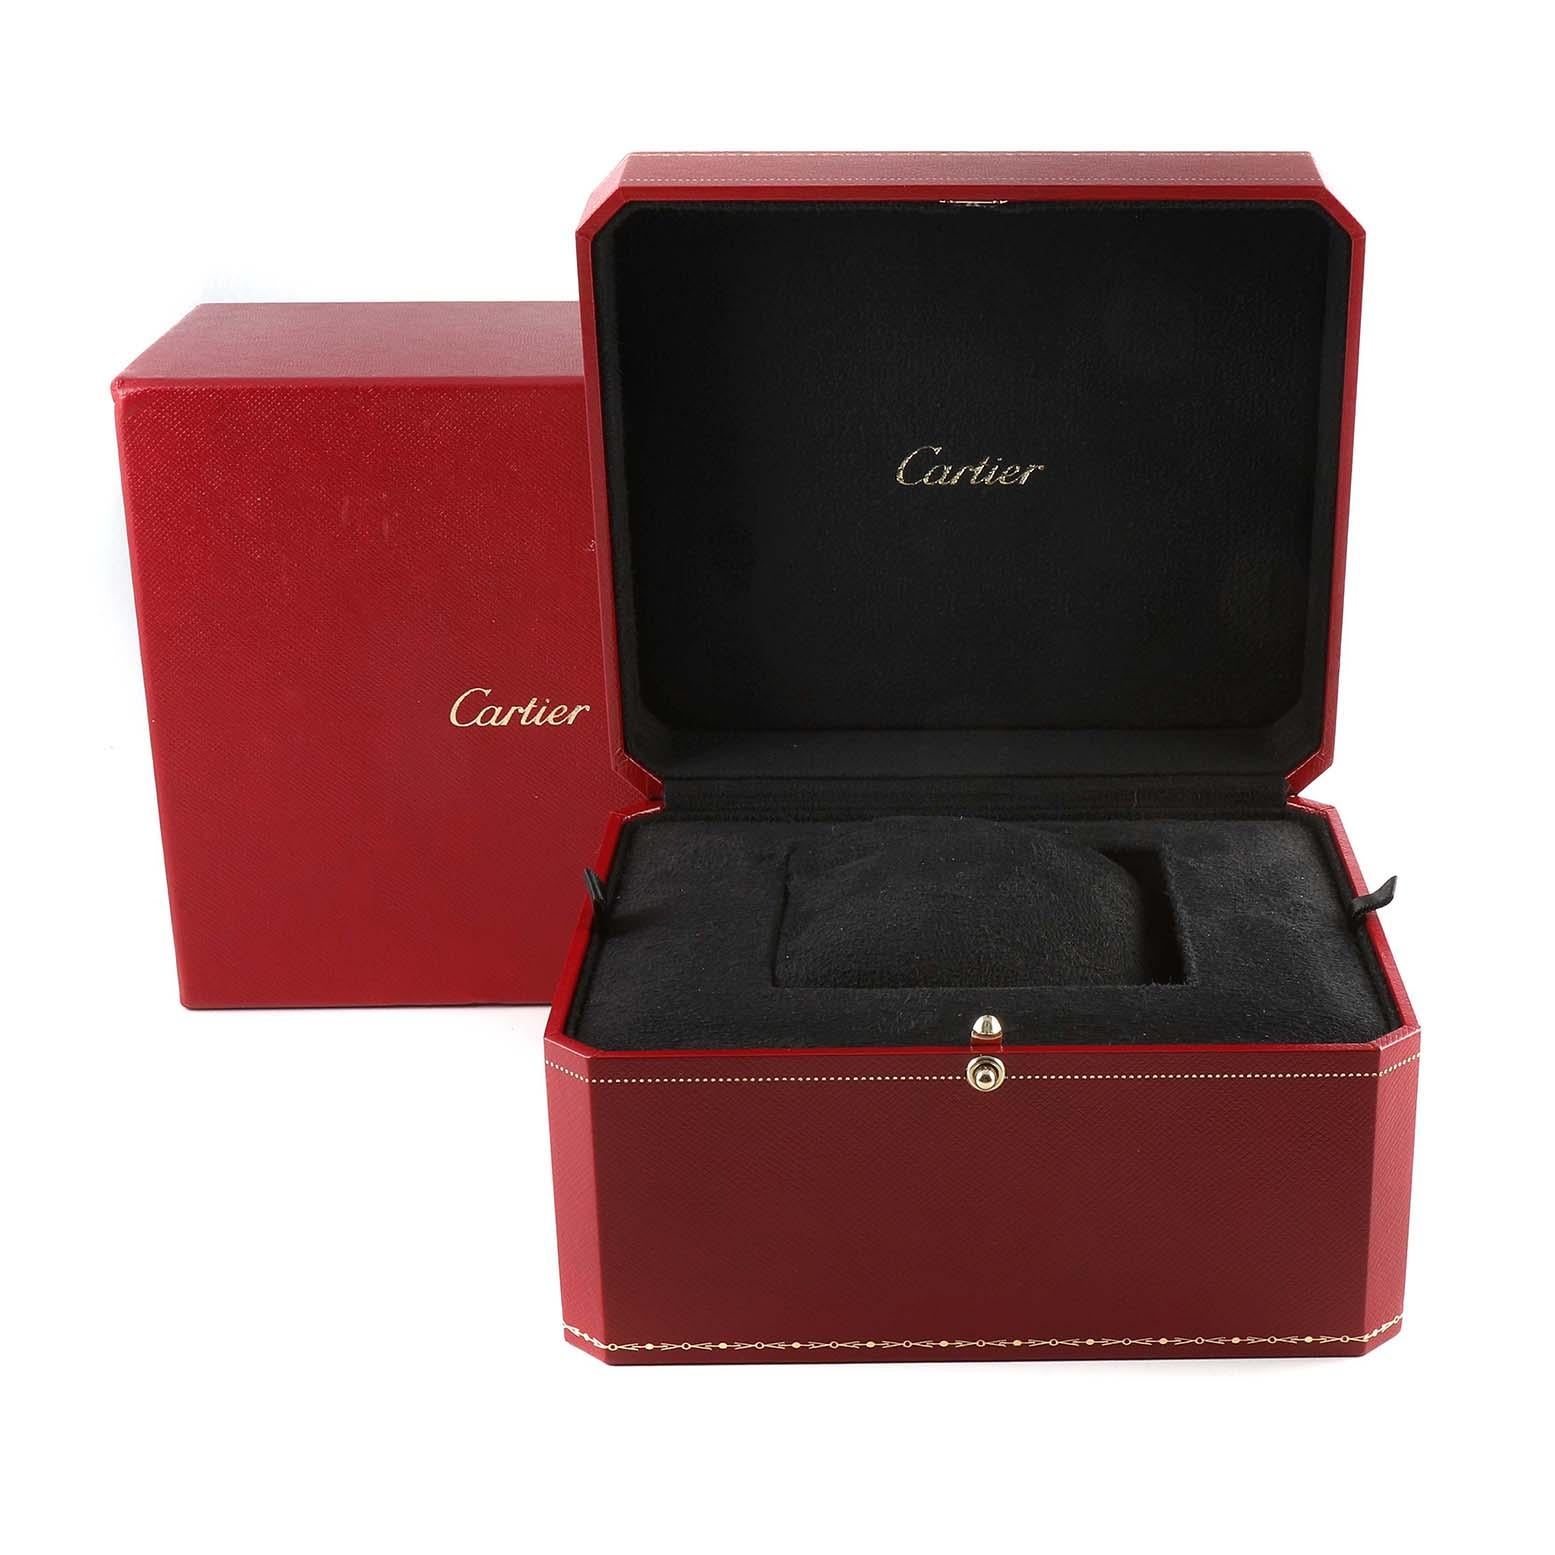 Cartier Captive Rose Gold Diamond Ladies Watch WG600011 For Sale 3